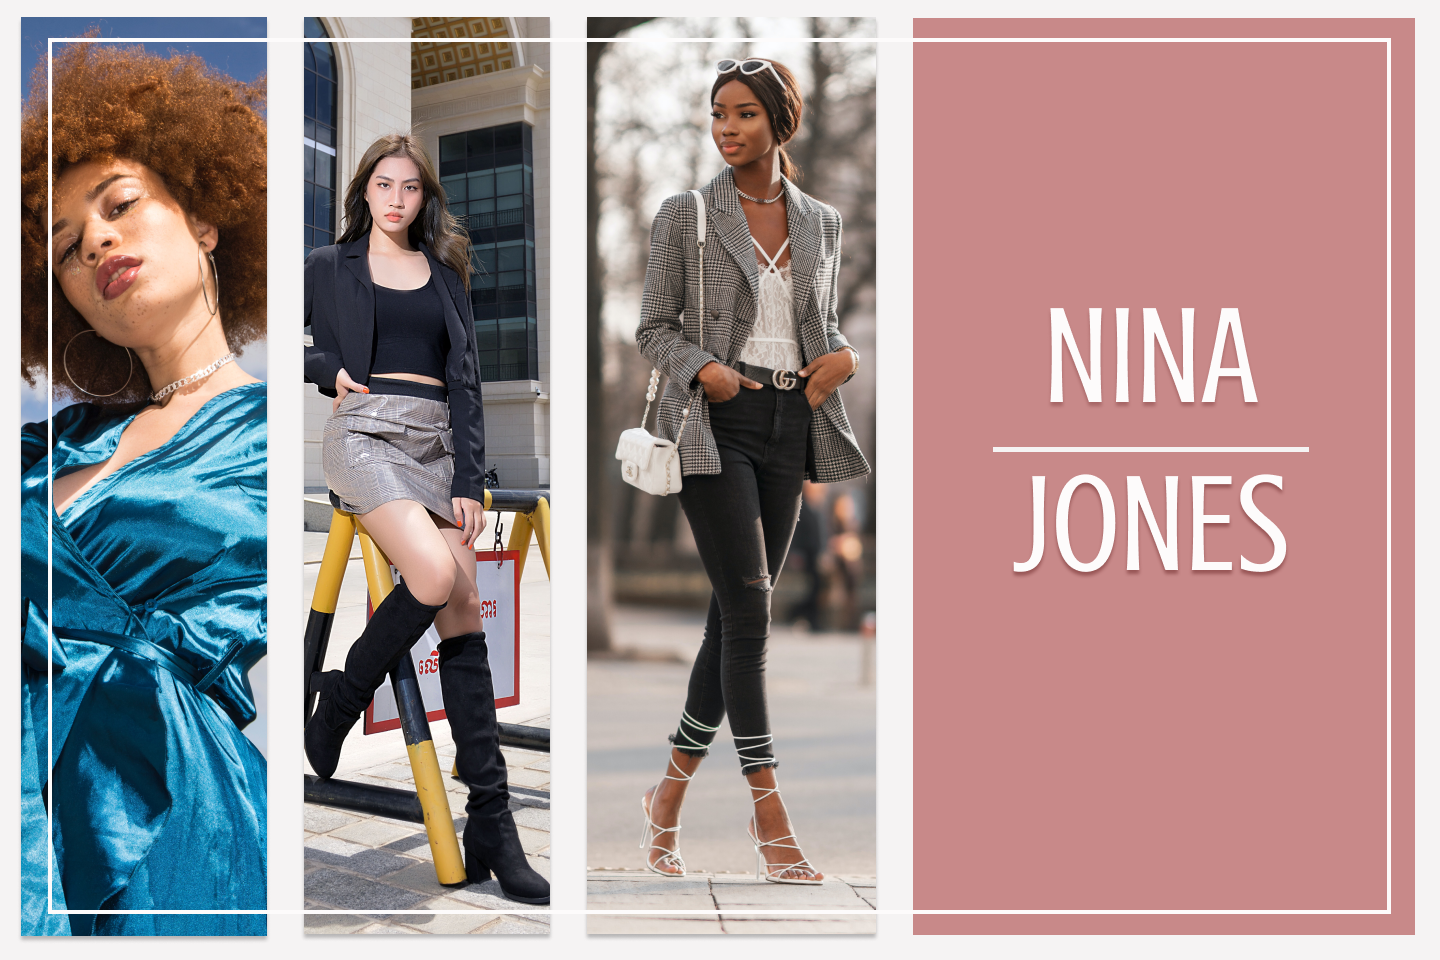 Nina Jones thumbnail with three images of women in fashionable clothing on the left and the text Nina Jones on the right with a pink background.